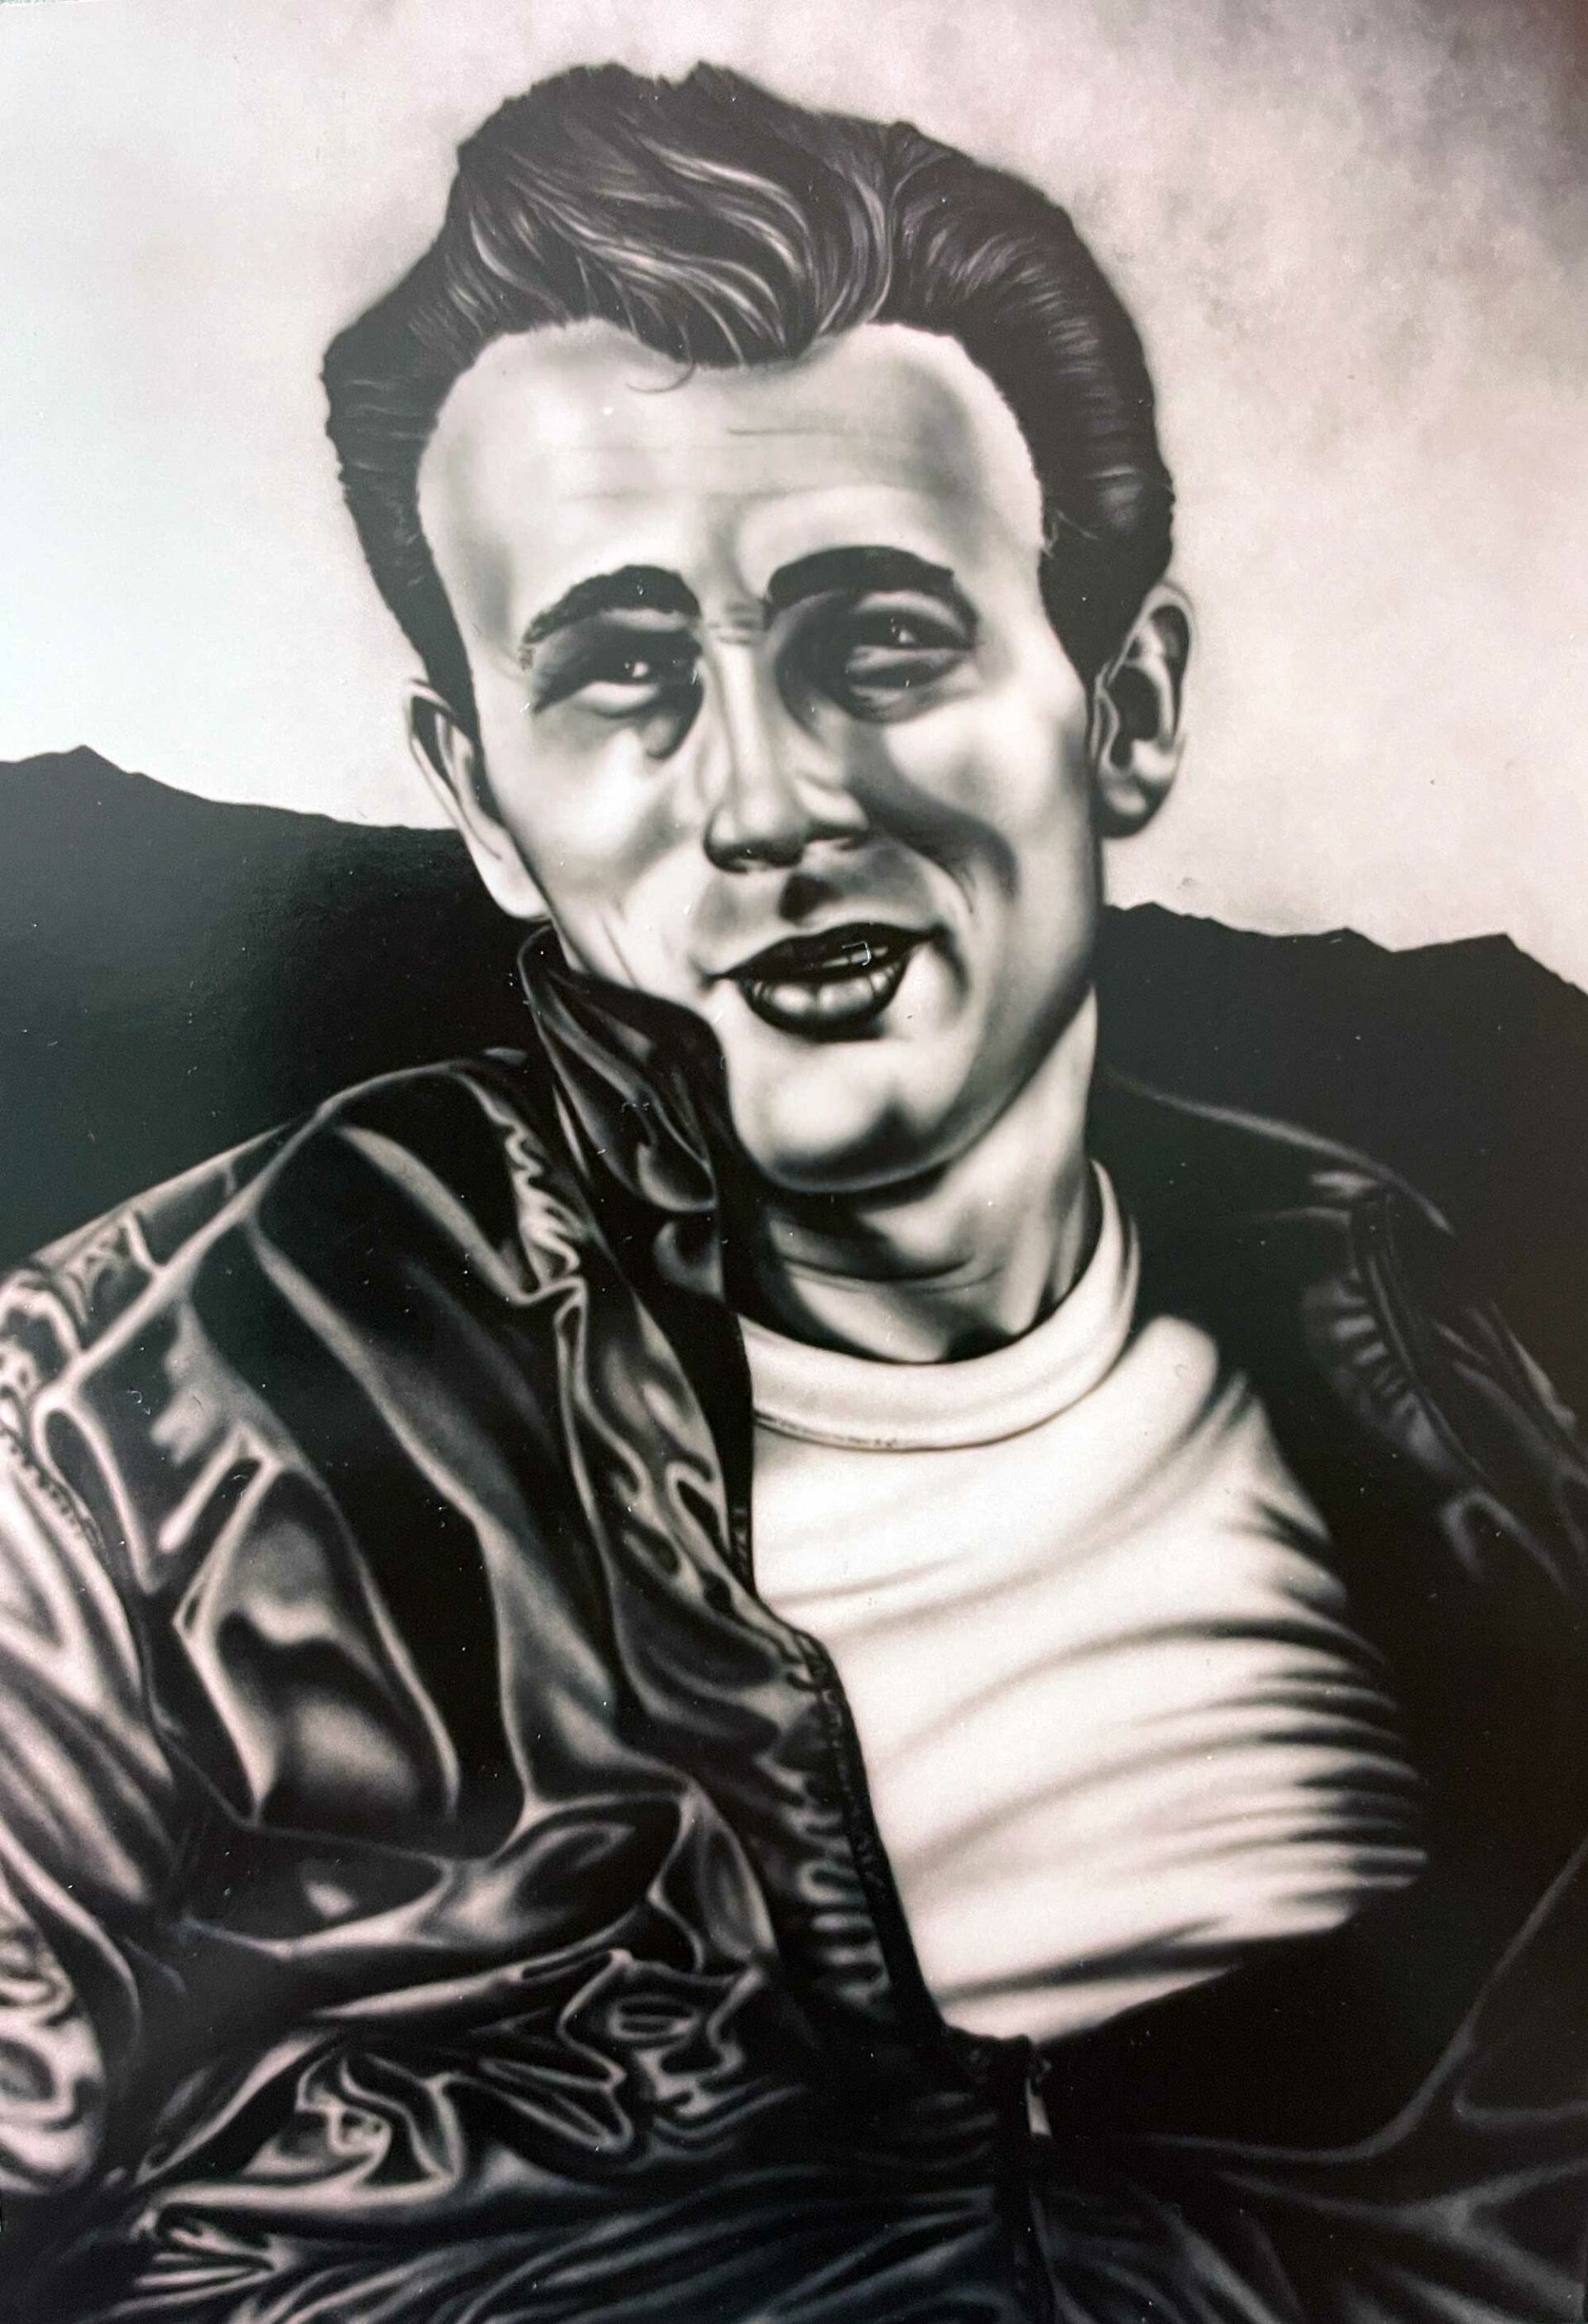 James Dean mural by A.D. Cook for Hollywood Video, 1989